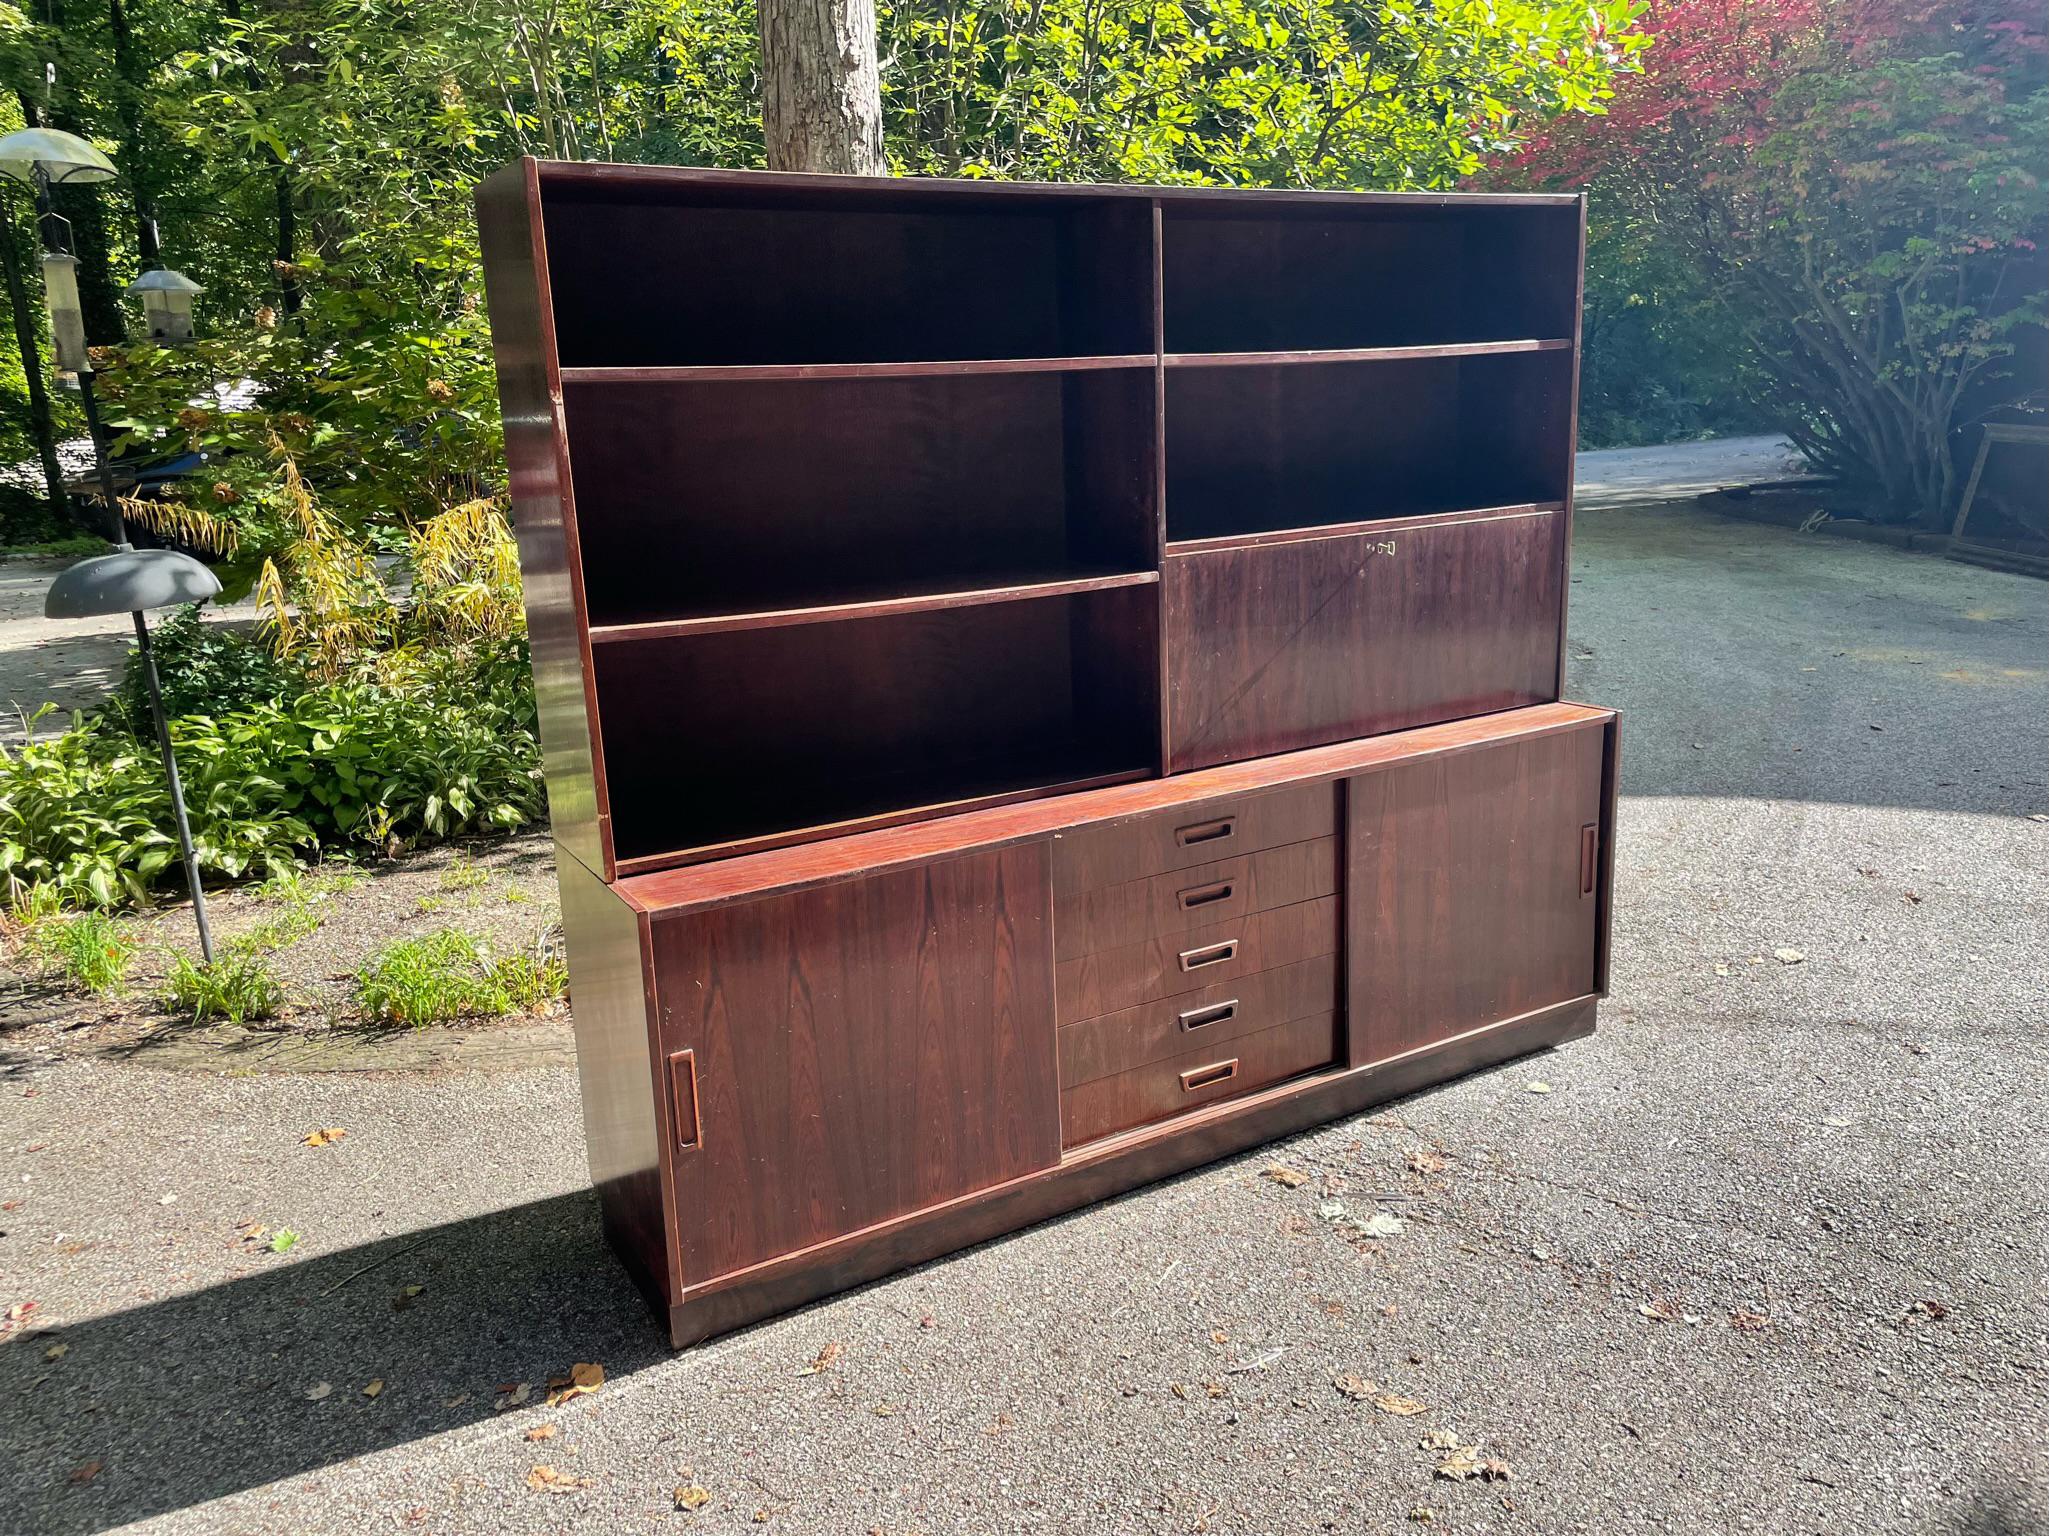 Vintage Danish modern rosewood credenza with removable shelving unit. Absolutely stunning rosewood wood grain. Fold down door can be used as desk or bar prep area. Sliding doors have adjustable shelves behind. Center bay has five drawers with